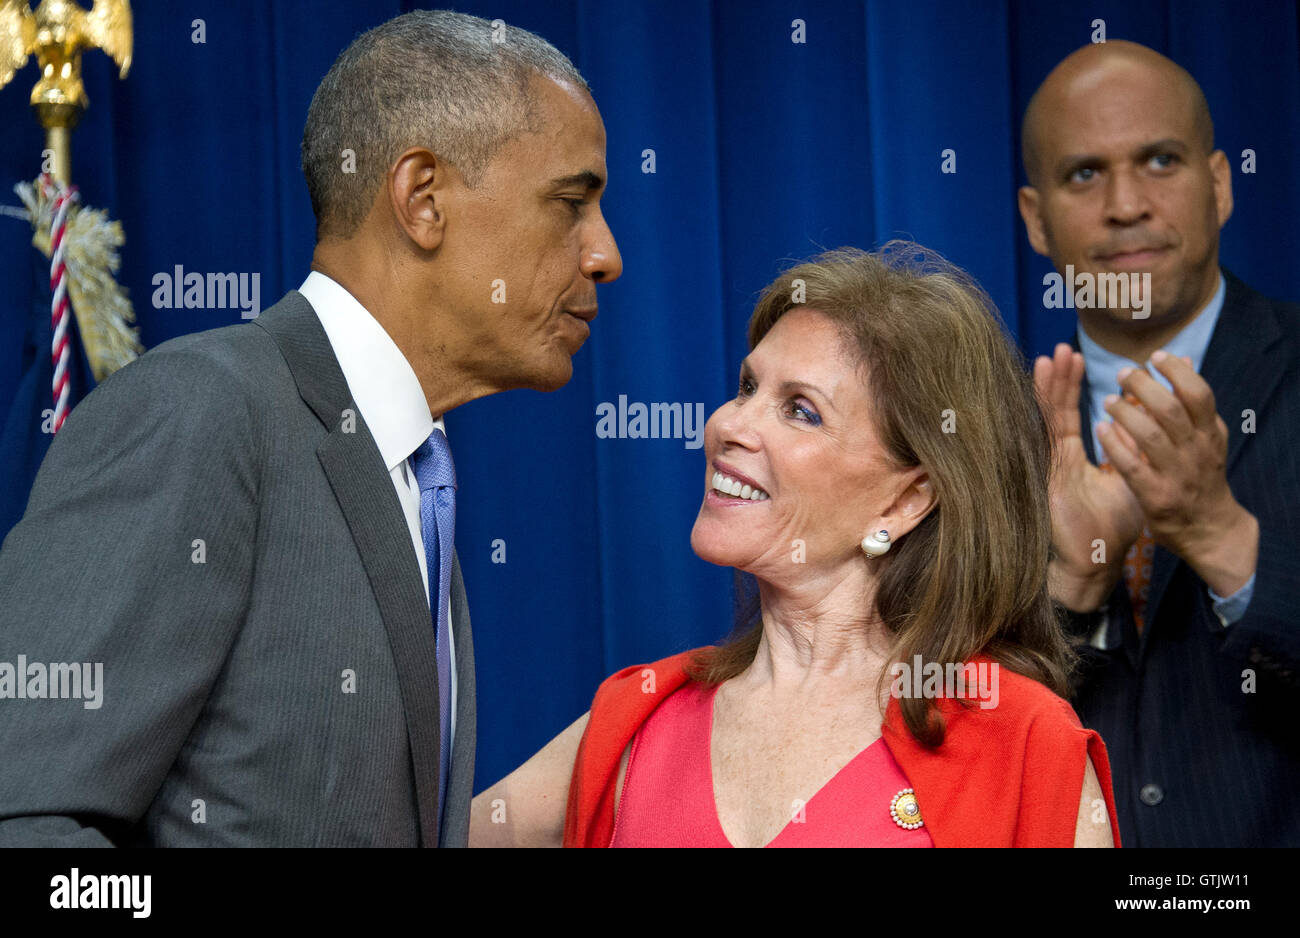 United States President Barack Obama and Bonnie Lautenberg, widow of US Senator Frank Lautenberg (Democrat of New Jersey) prior to his signing H.R. 2576, the Frank R. Lautenberg Chemical Safety for the 21st Century Act in the South Court Auditorium of the Stock Photo